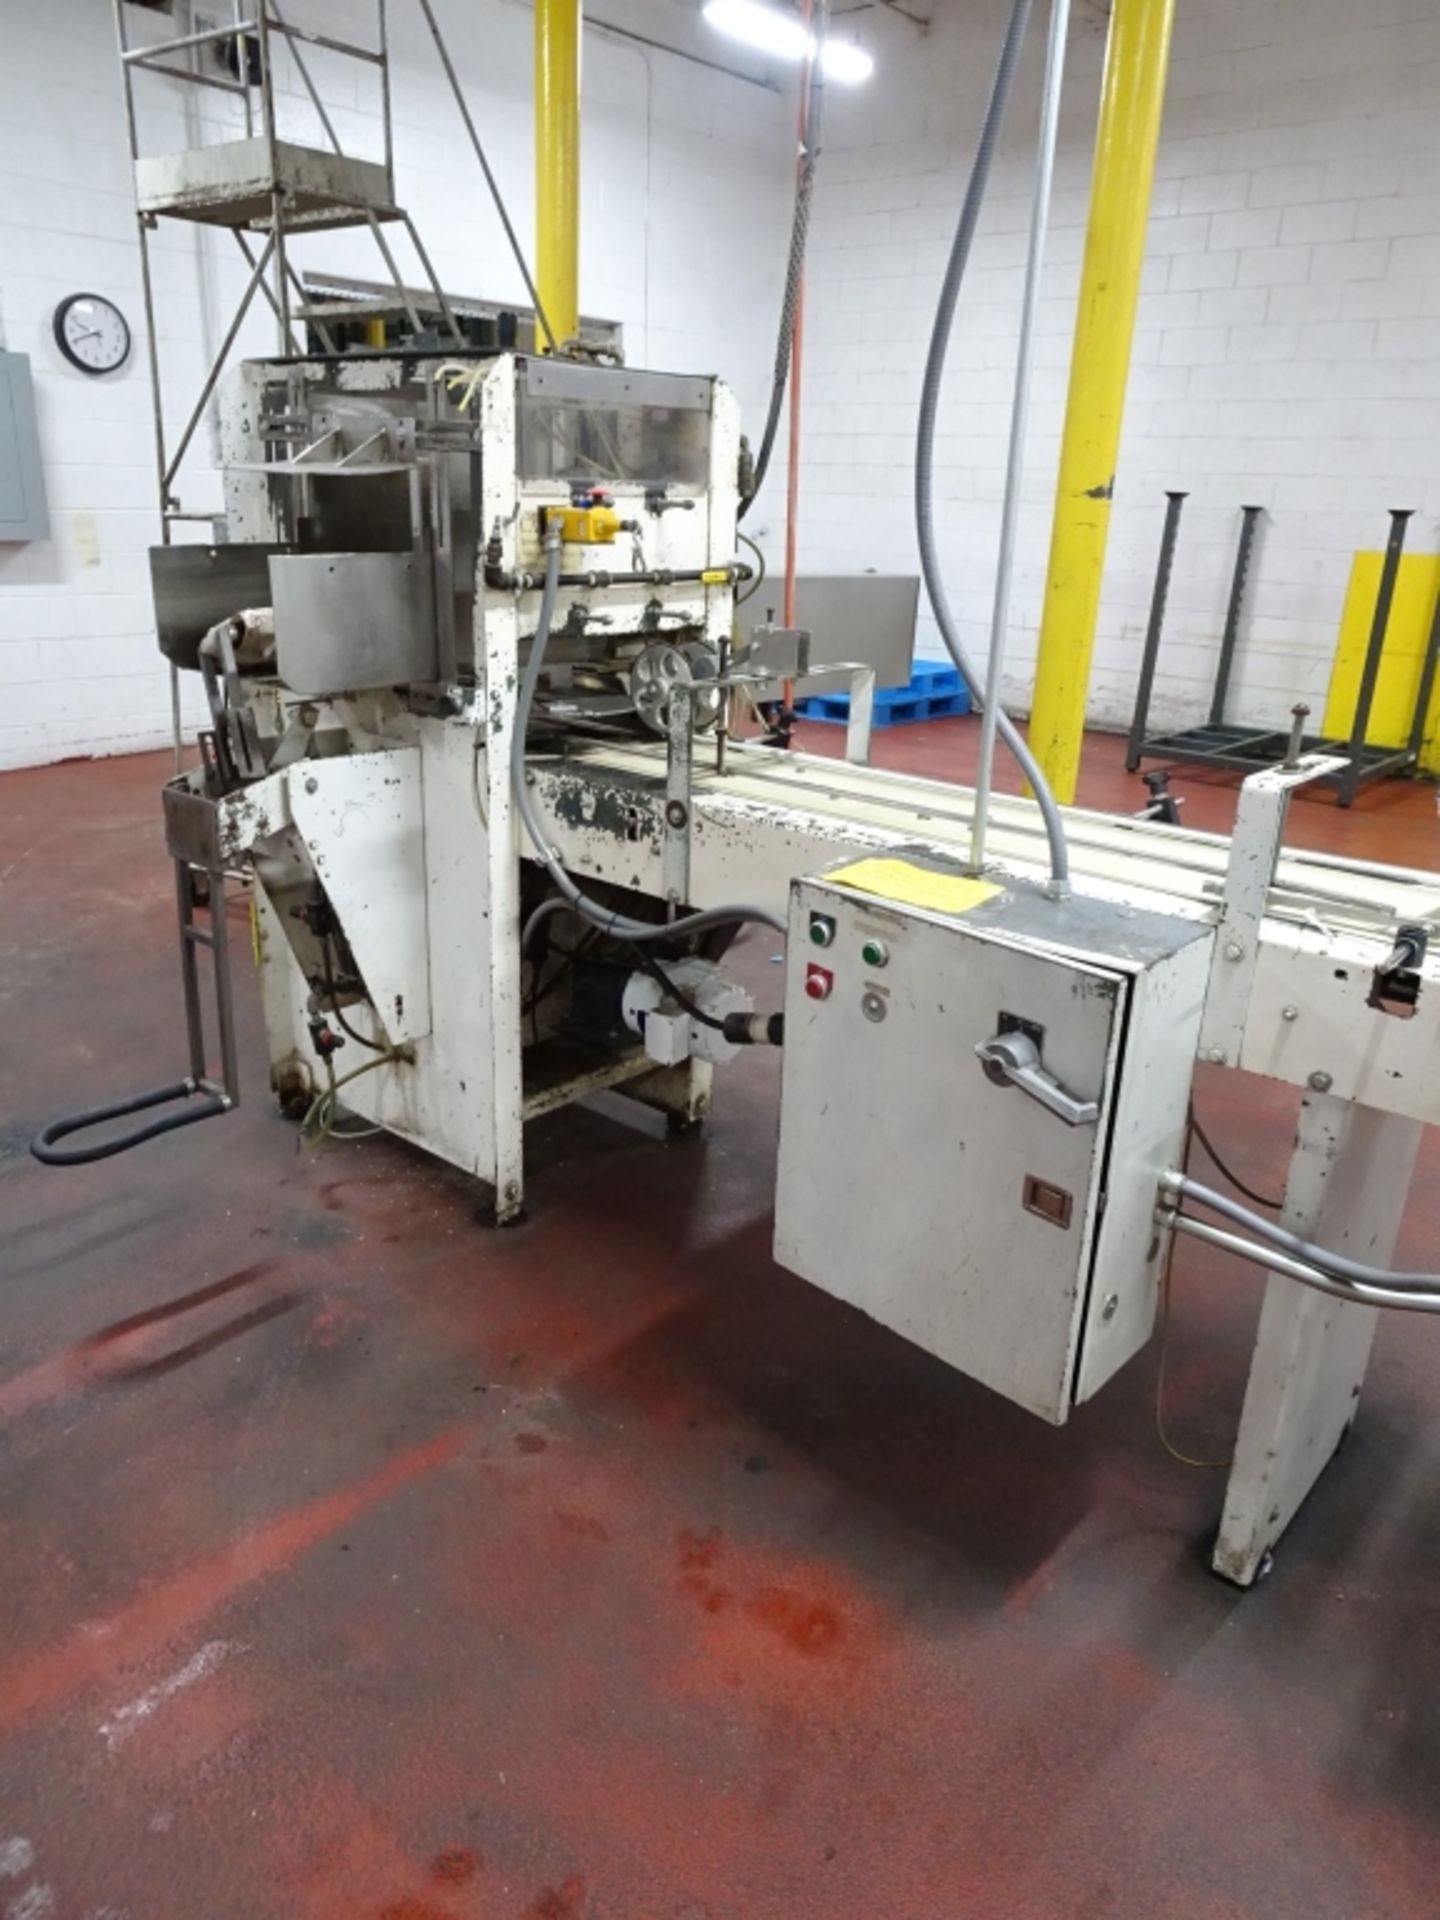 A-B-C Packaging Machine Model SP-15 Semi Automatic Case Packer, S/N 18479 w/ SpanTech The Designer - Image 2 of 8